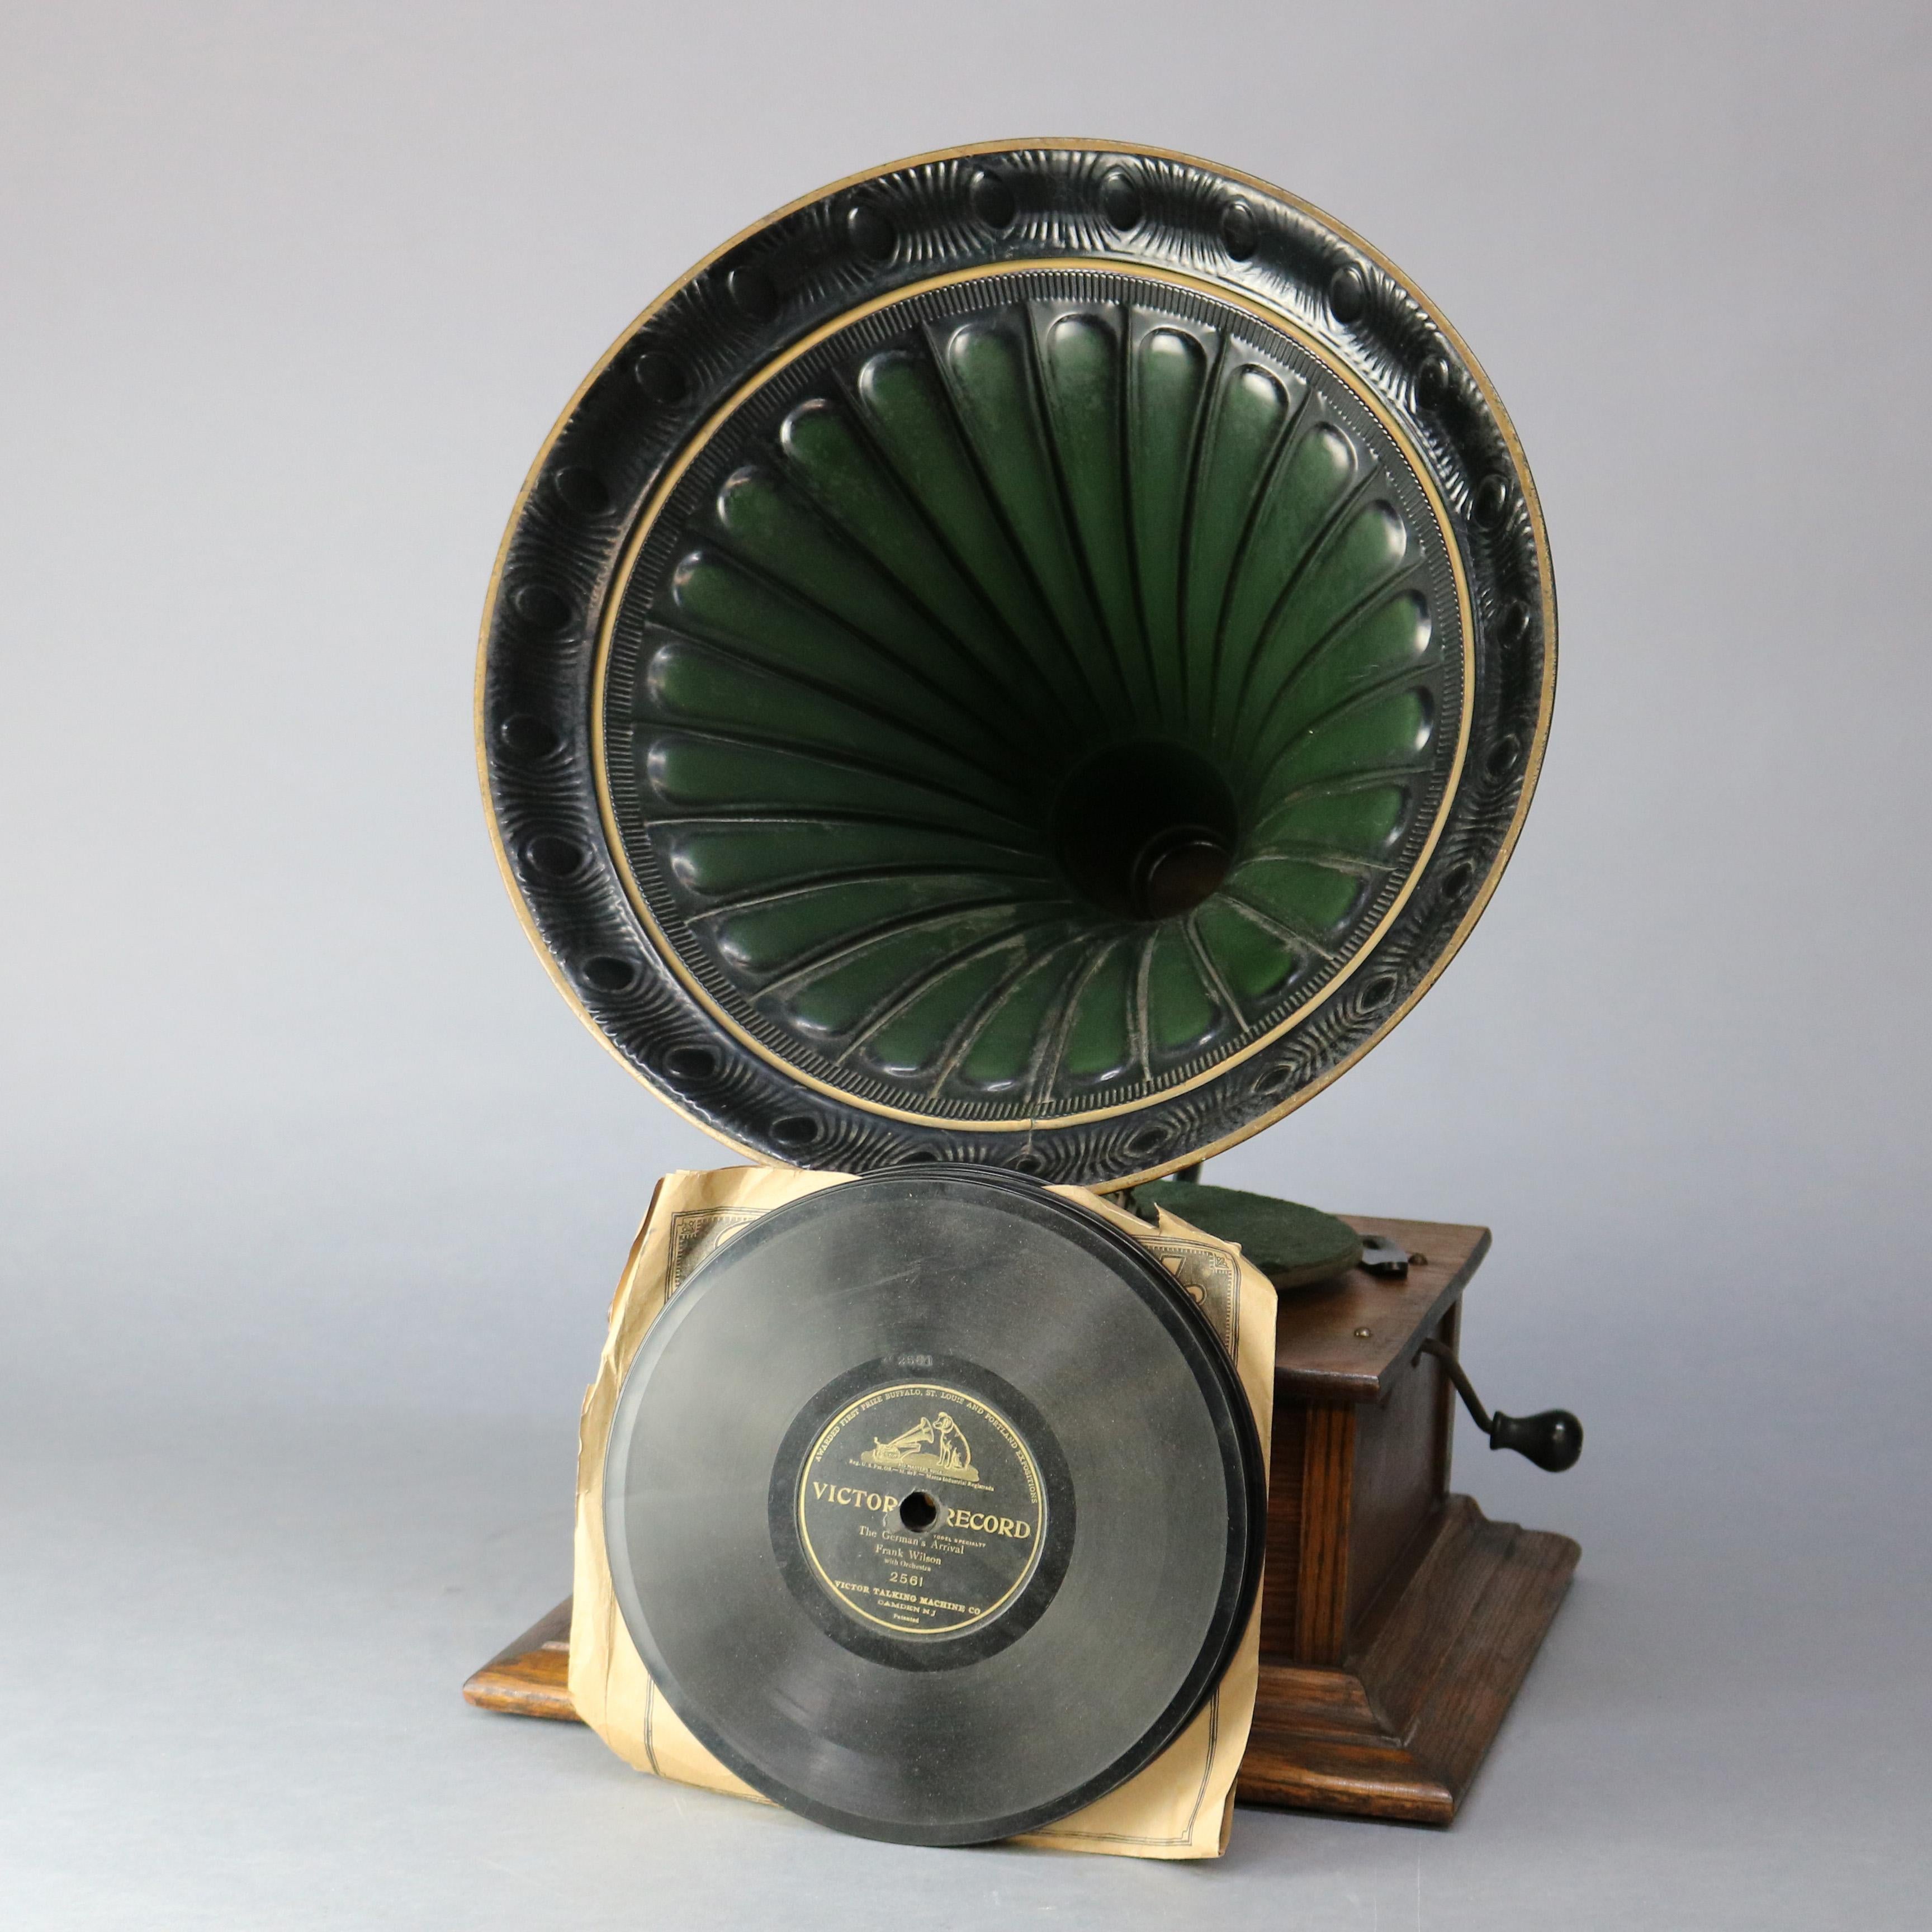 An antique Victor Victrola Standard Phonograph talking machine offers oak case with crank outside fluted horn and records, original label as photographed, complete works and unknown working condition, circa 1900.

Measures: 25.5